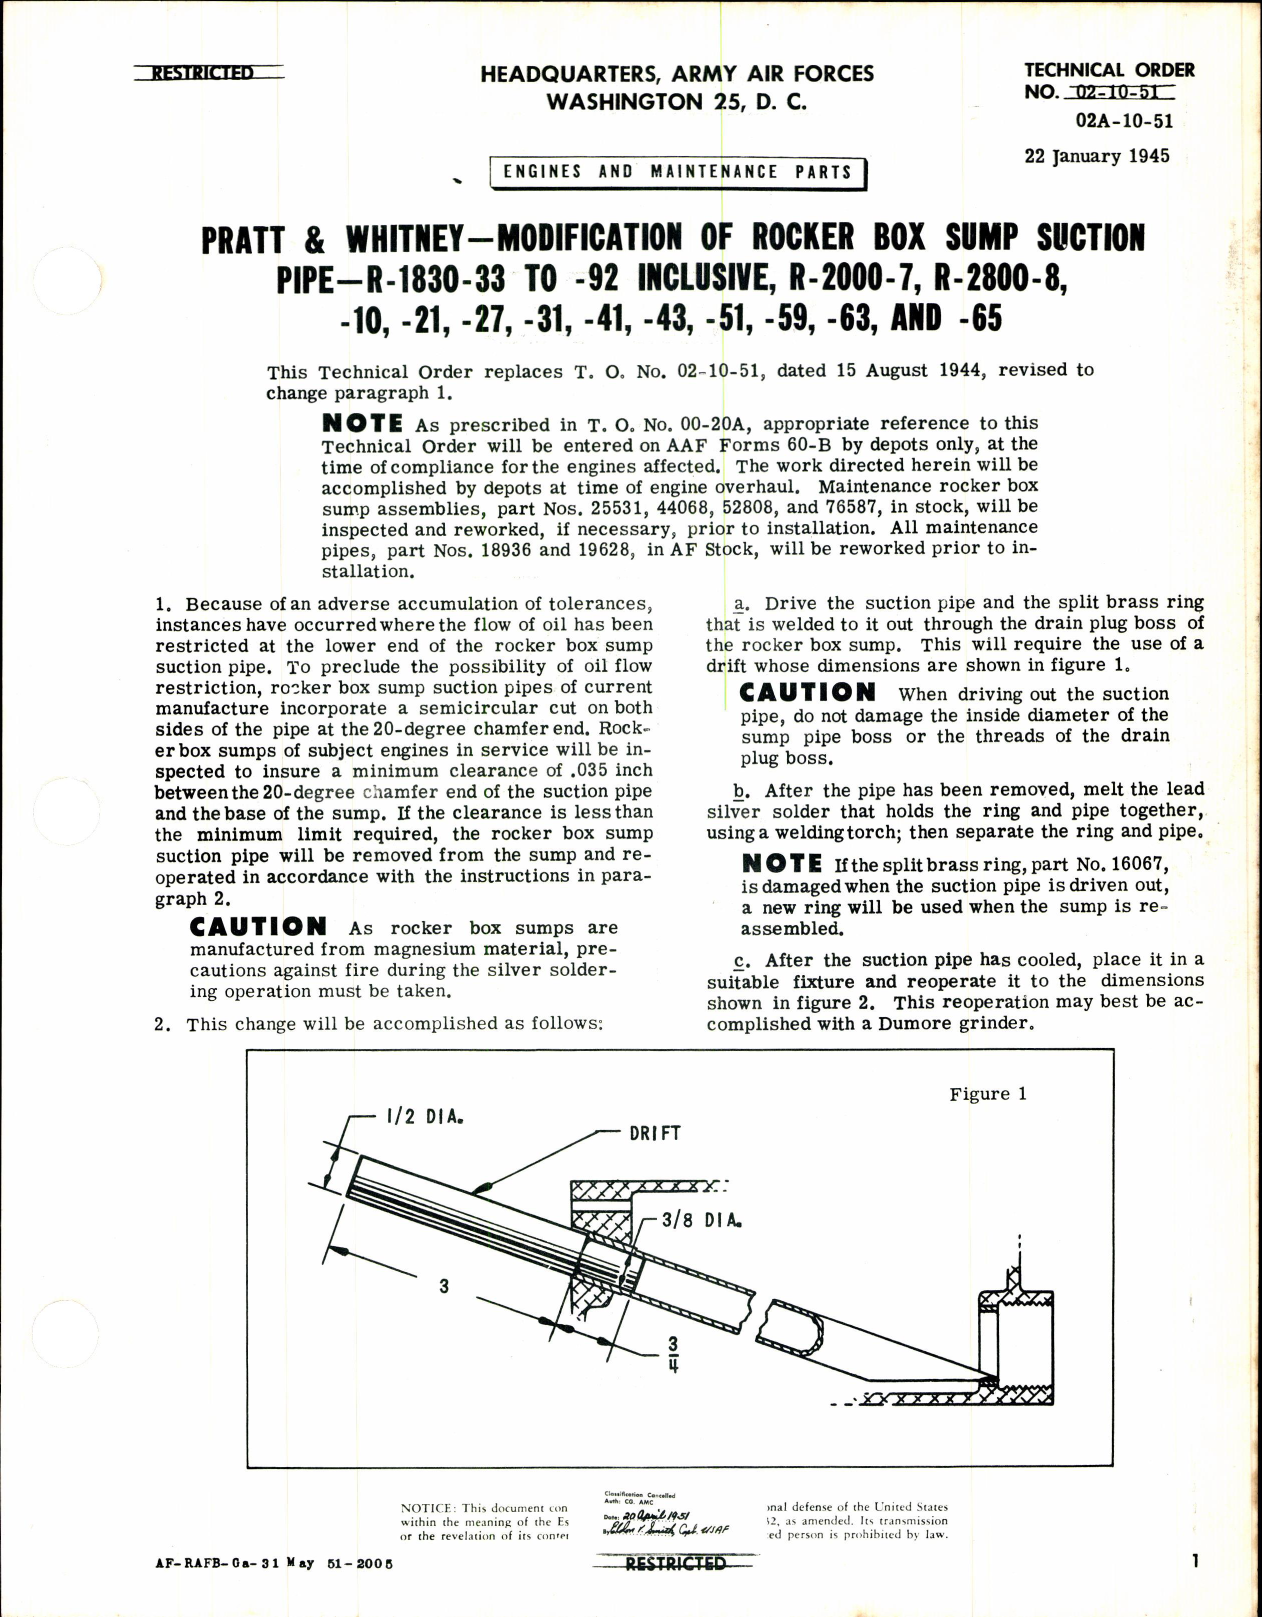 Sample page 1 from AirCorps Library document: Modification, Rocker Sump Suction Pipe for R-1830, R-2000 & R-2800